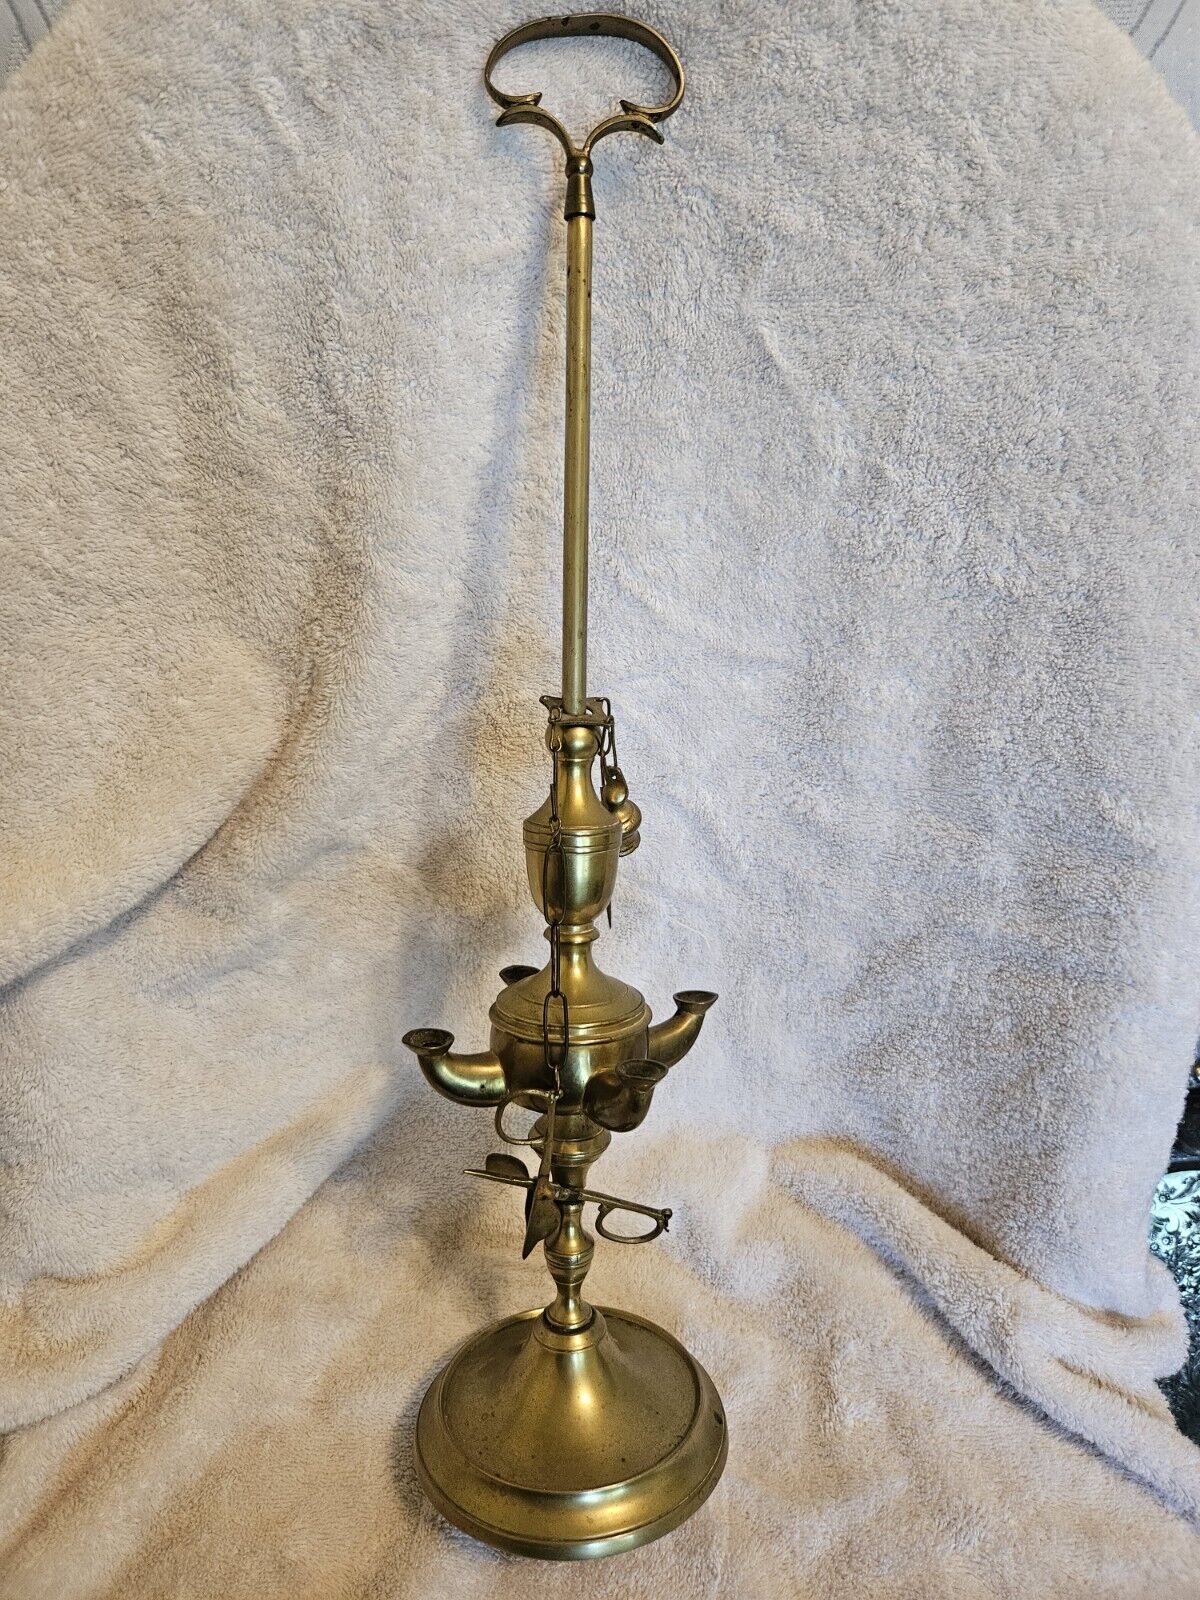 ANTIQUE ORIGINAL Late 1800's BRASS 4 WICK WHALE OIL LAMP 21 INCHES TALL EXT RARE